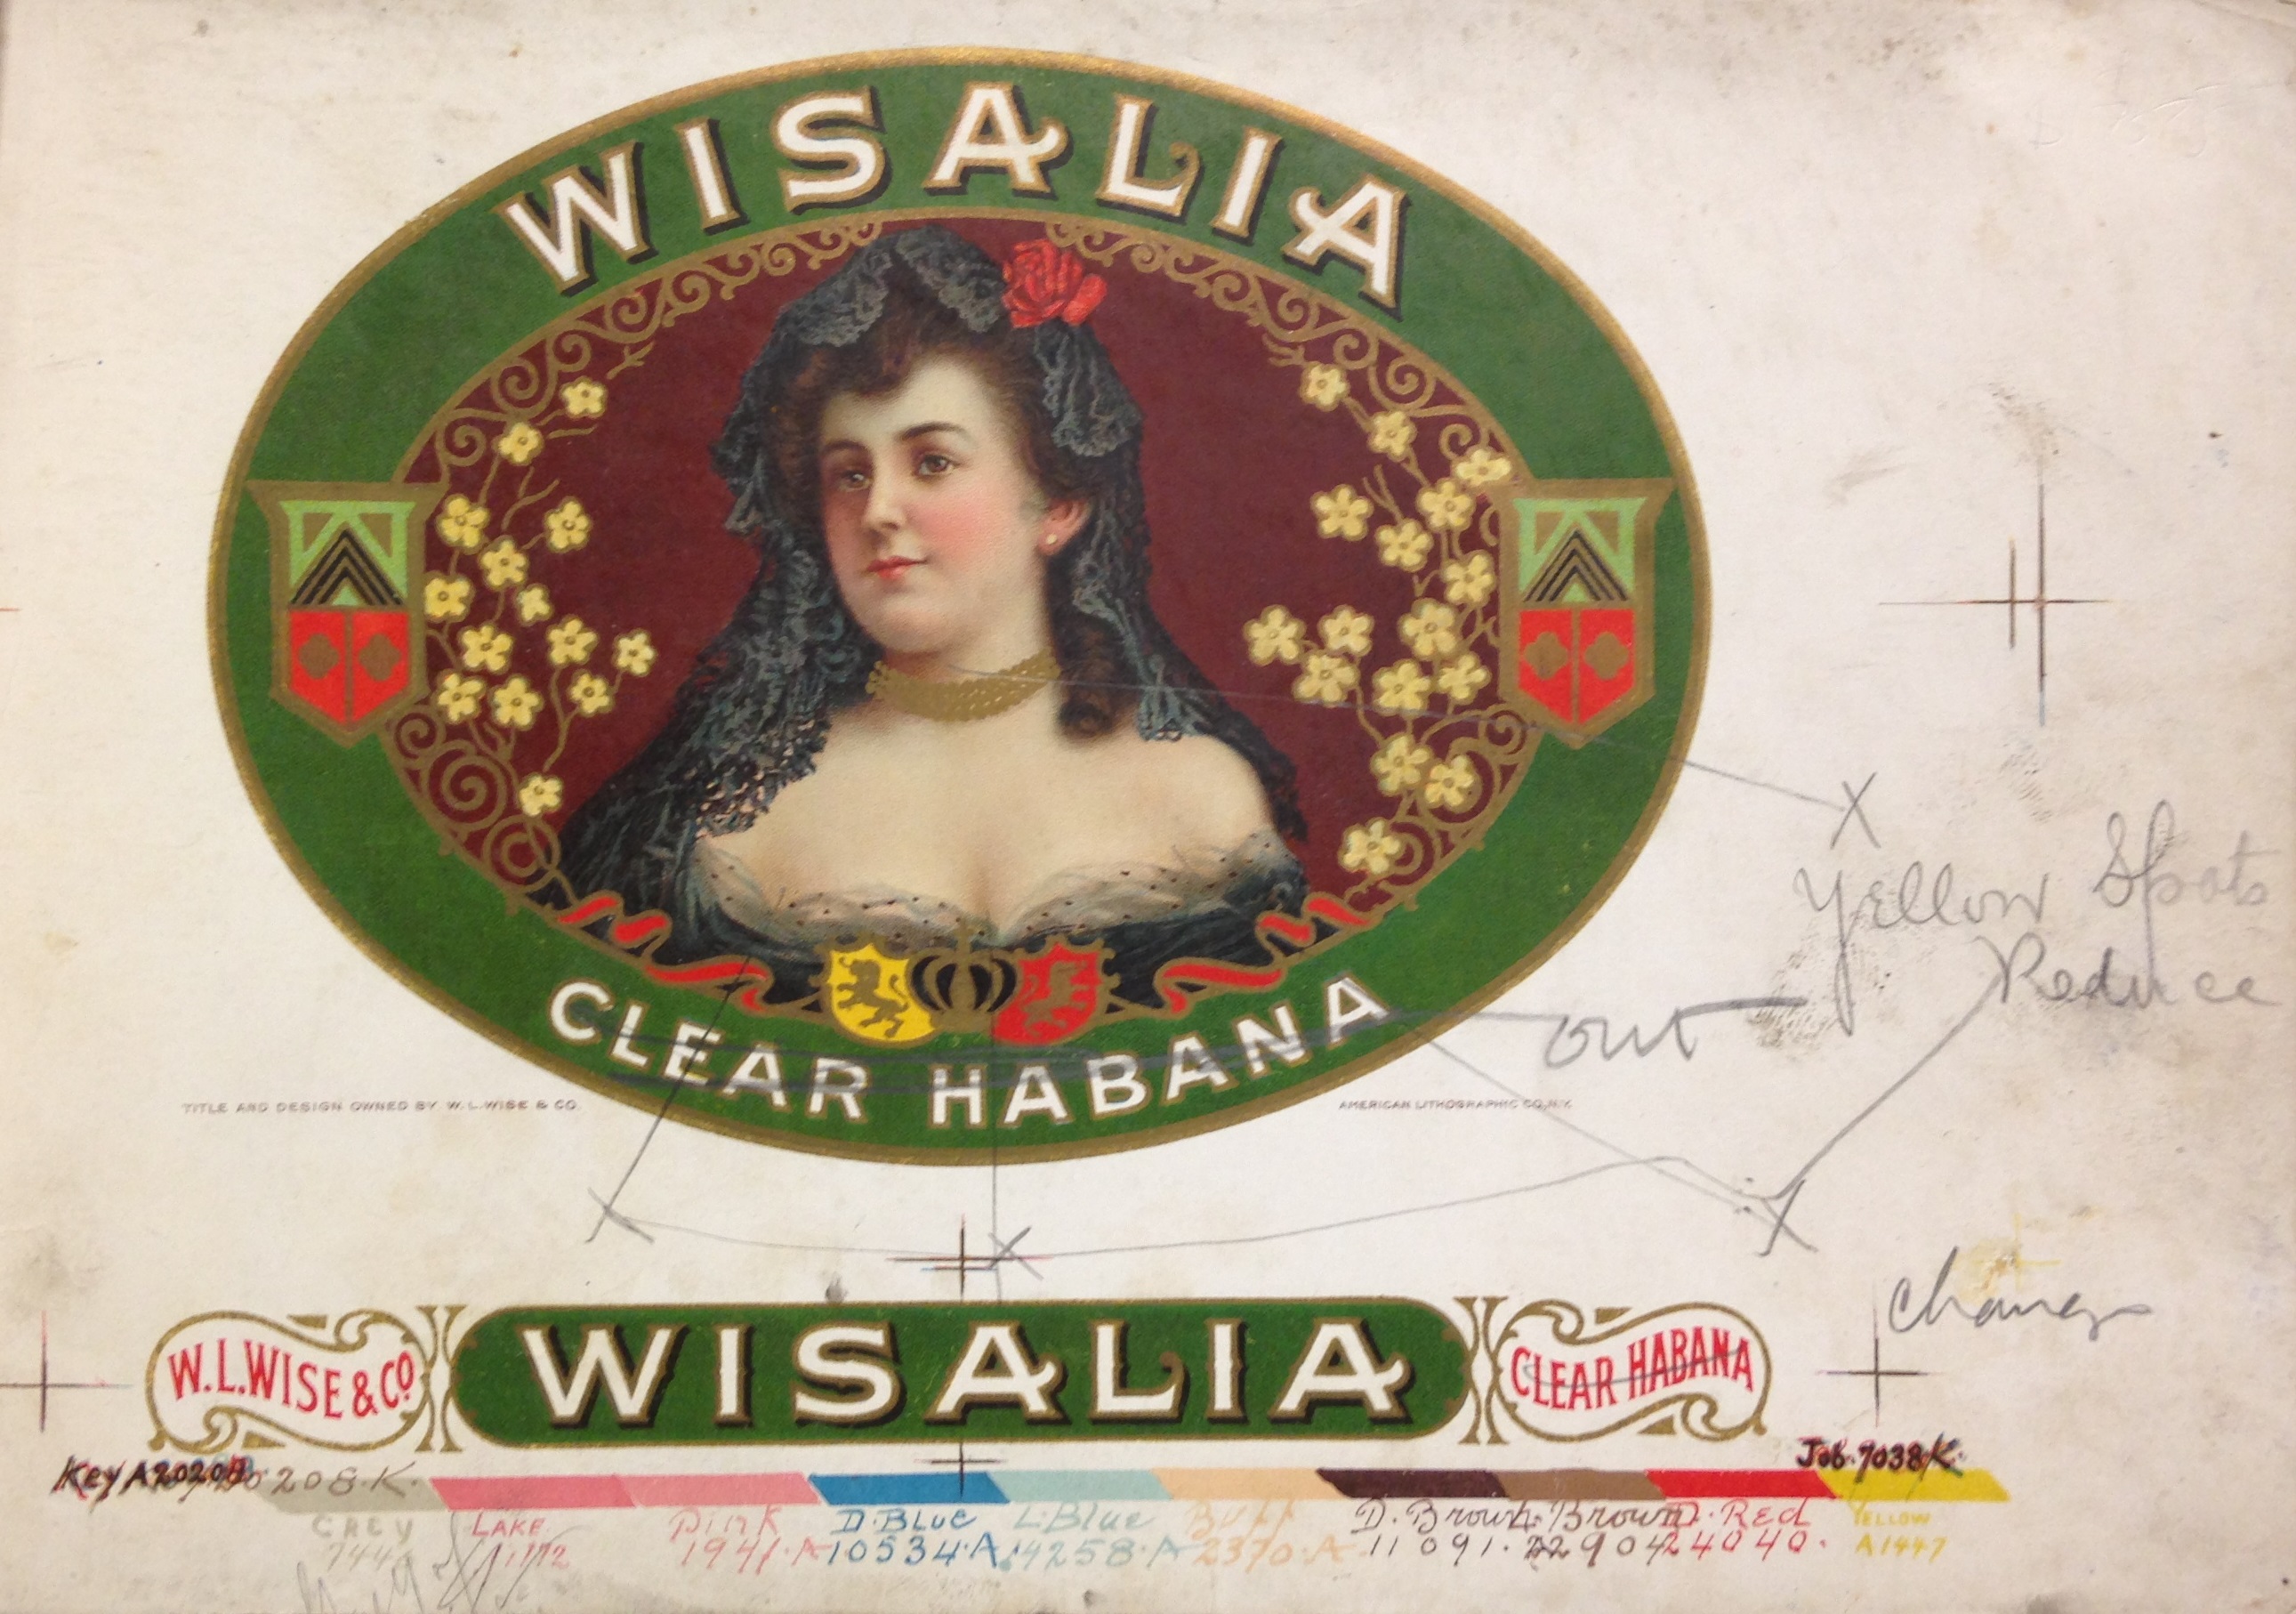 Proof of a 10-color chromolithographed cigar box label, marked up for correction (NE2515 .A54 1900)